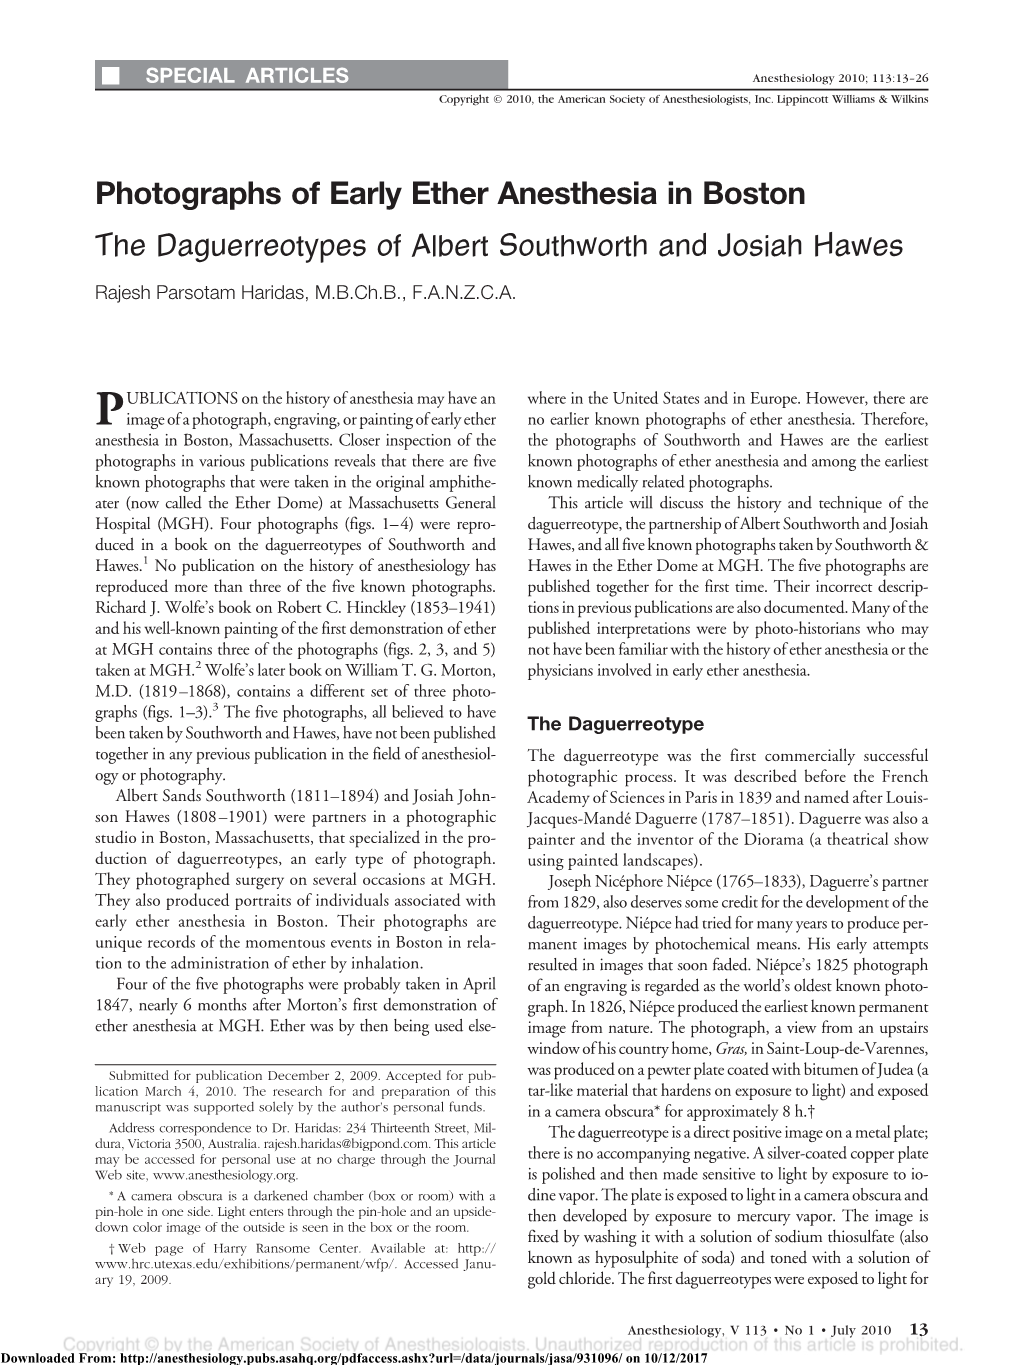 Photographs of Early Ether Anesthesia in Bostonthe